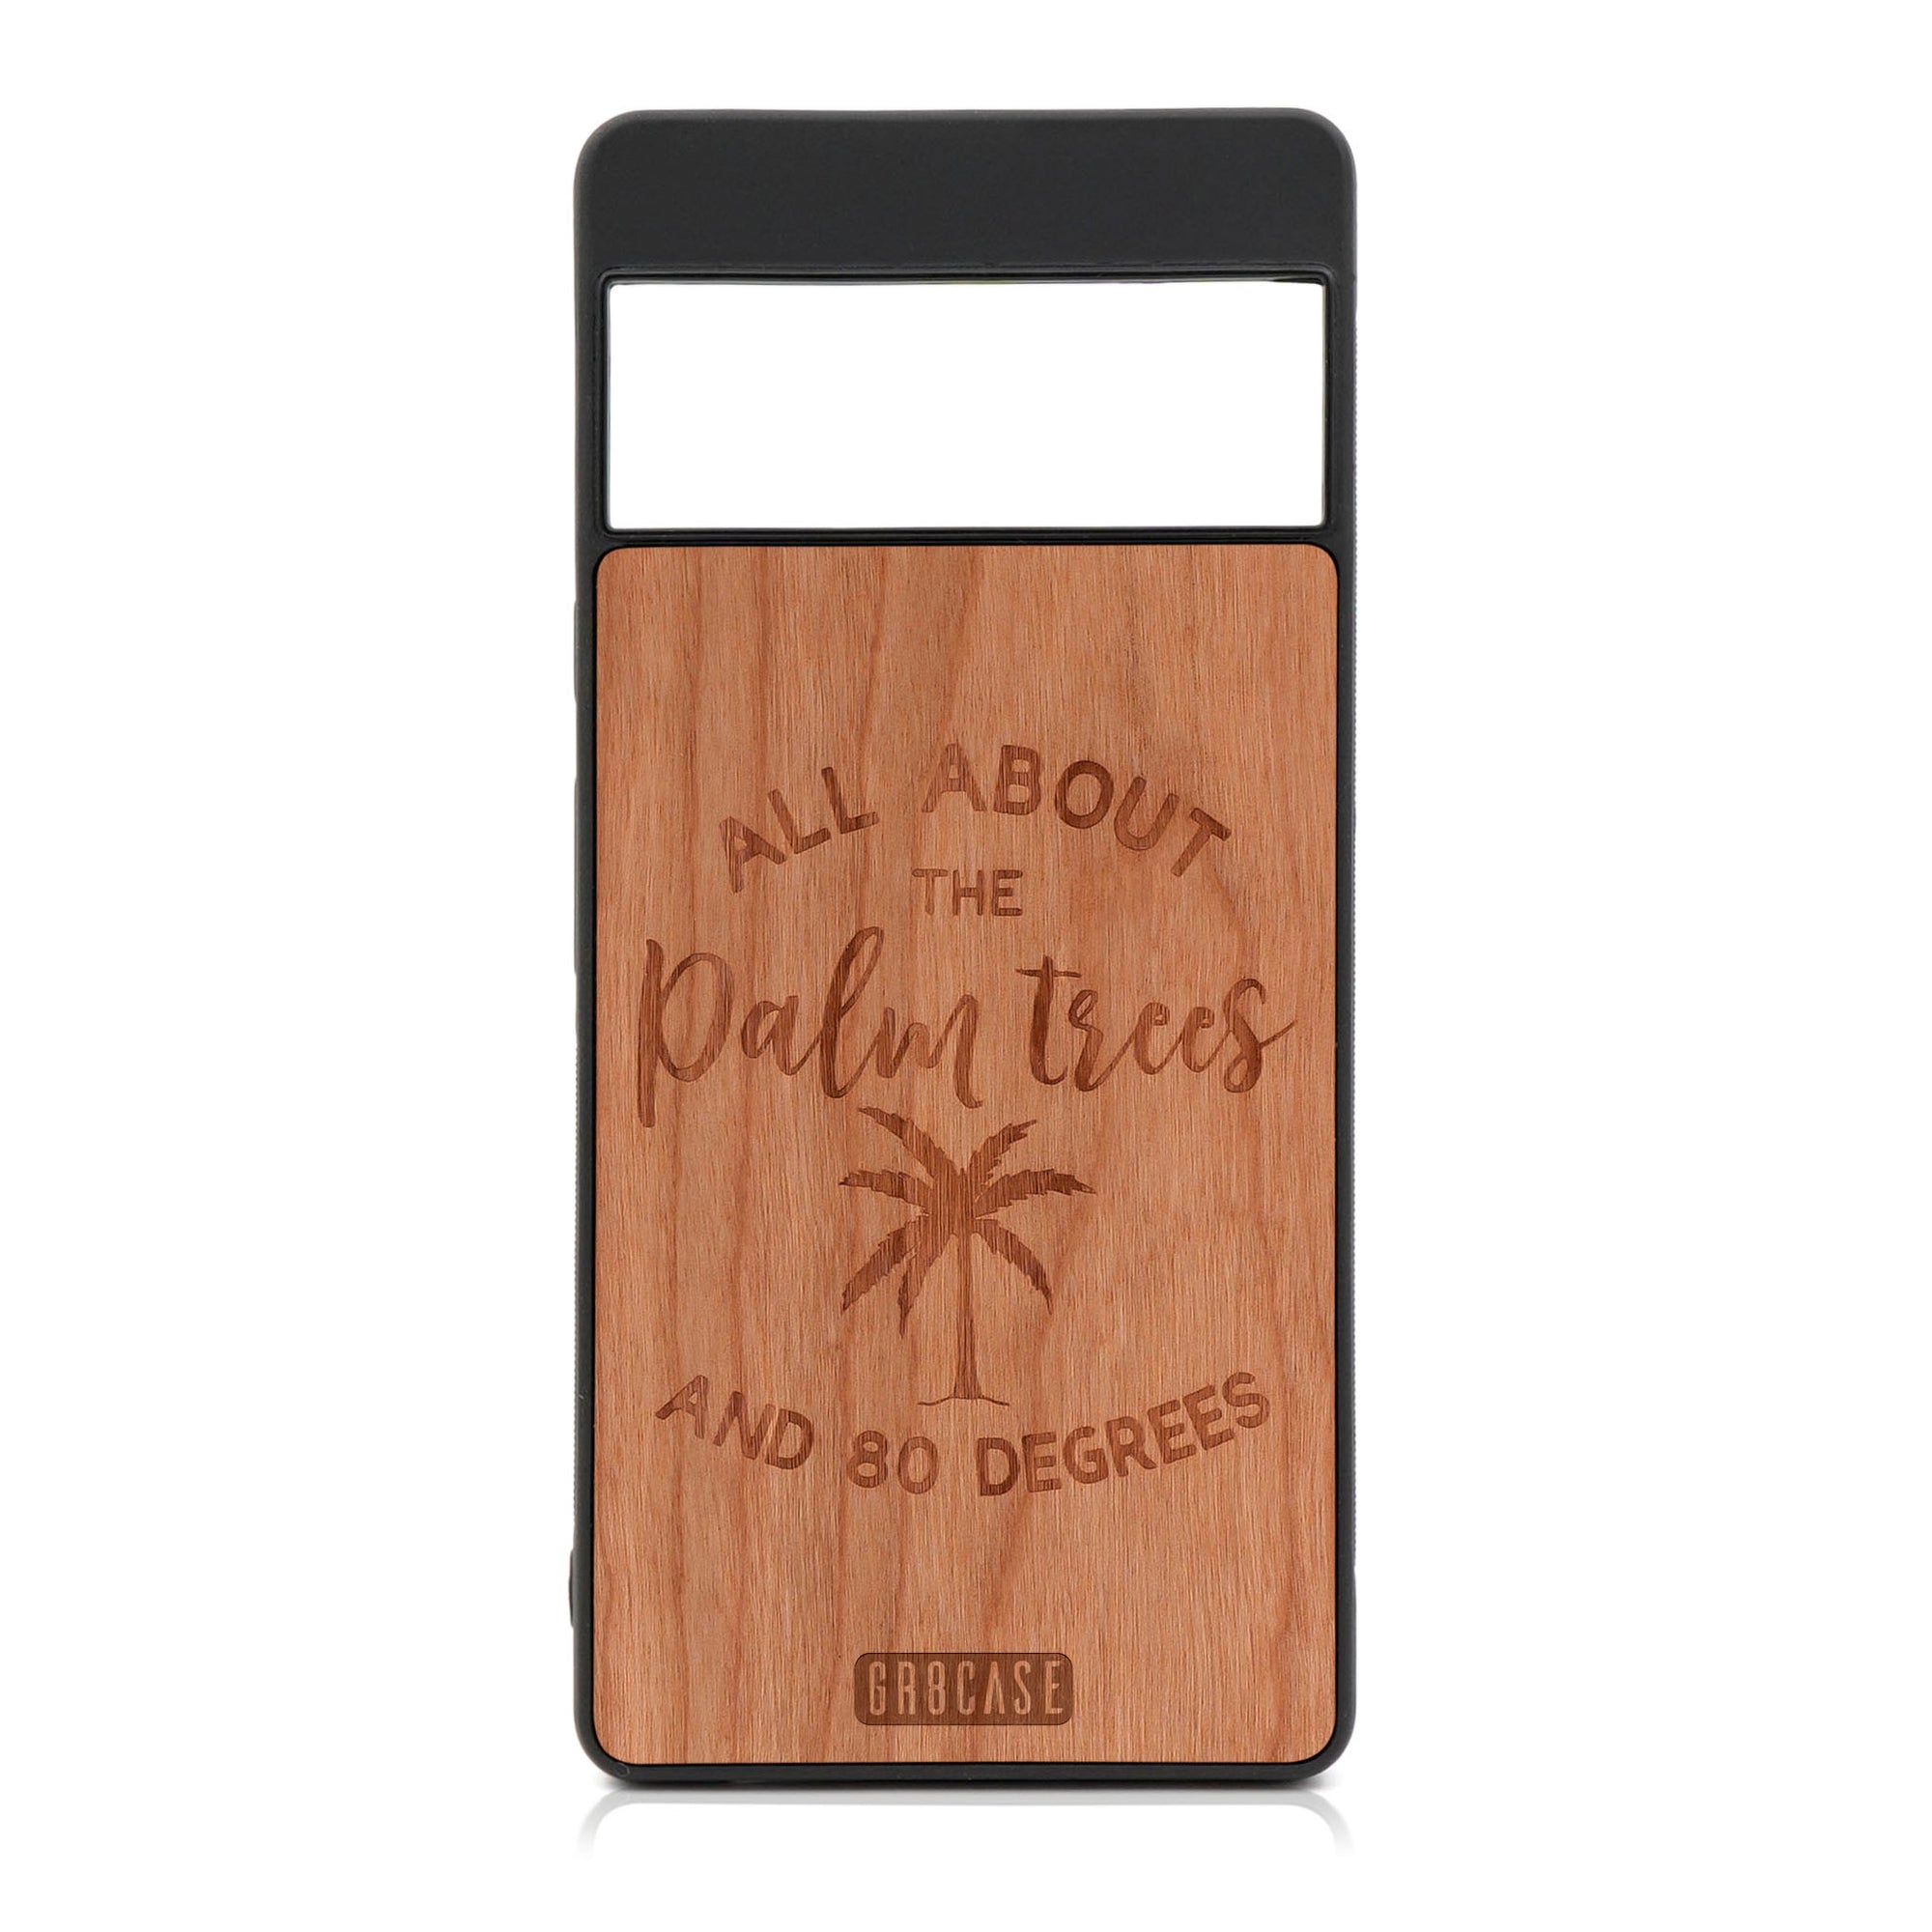 All About The Palm Trees And 80 Degree Design Wood Case For Google Pixel 6